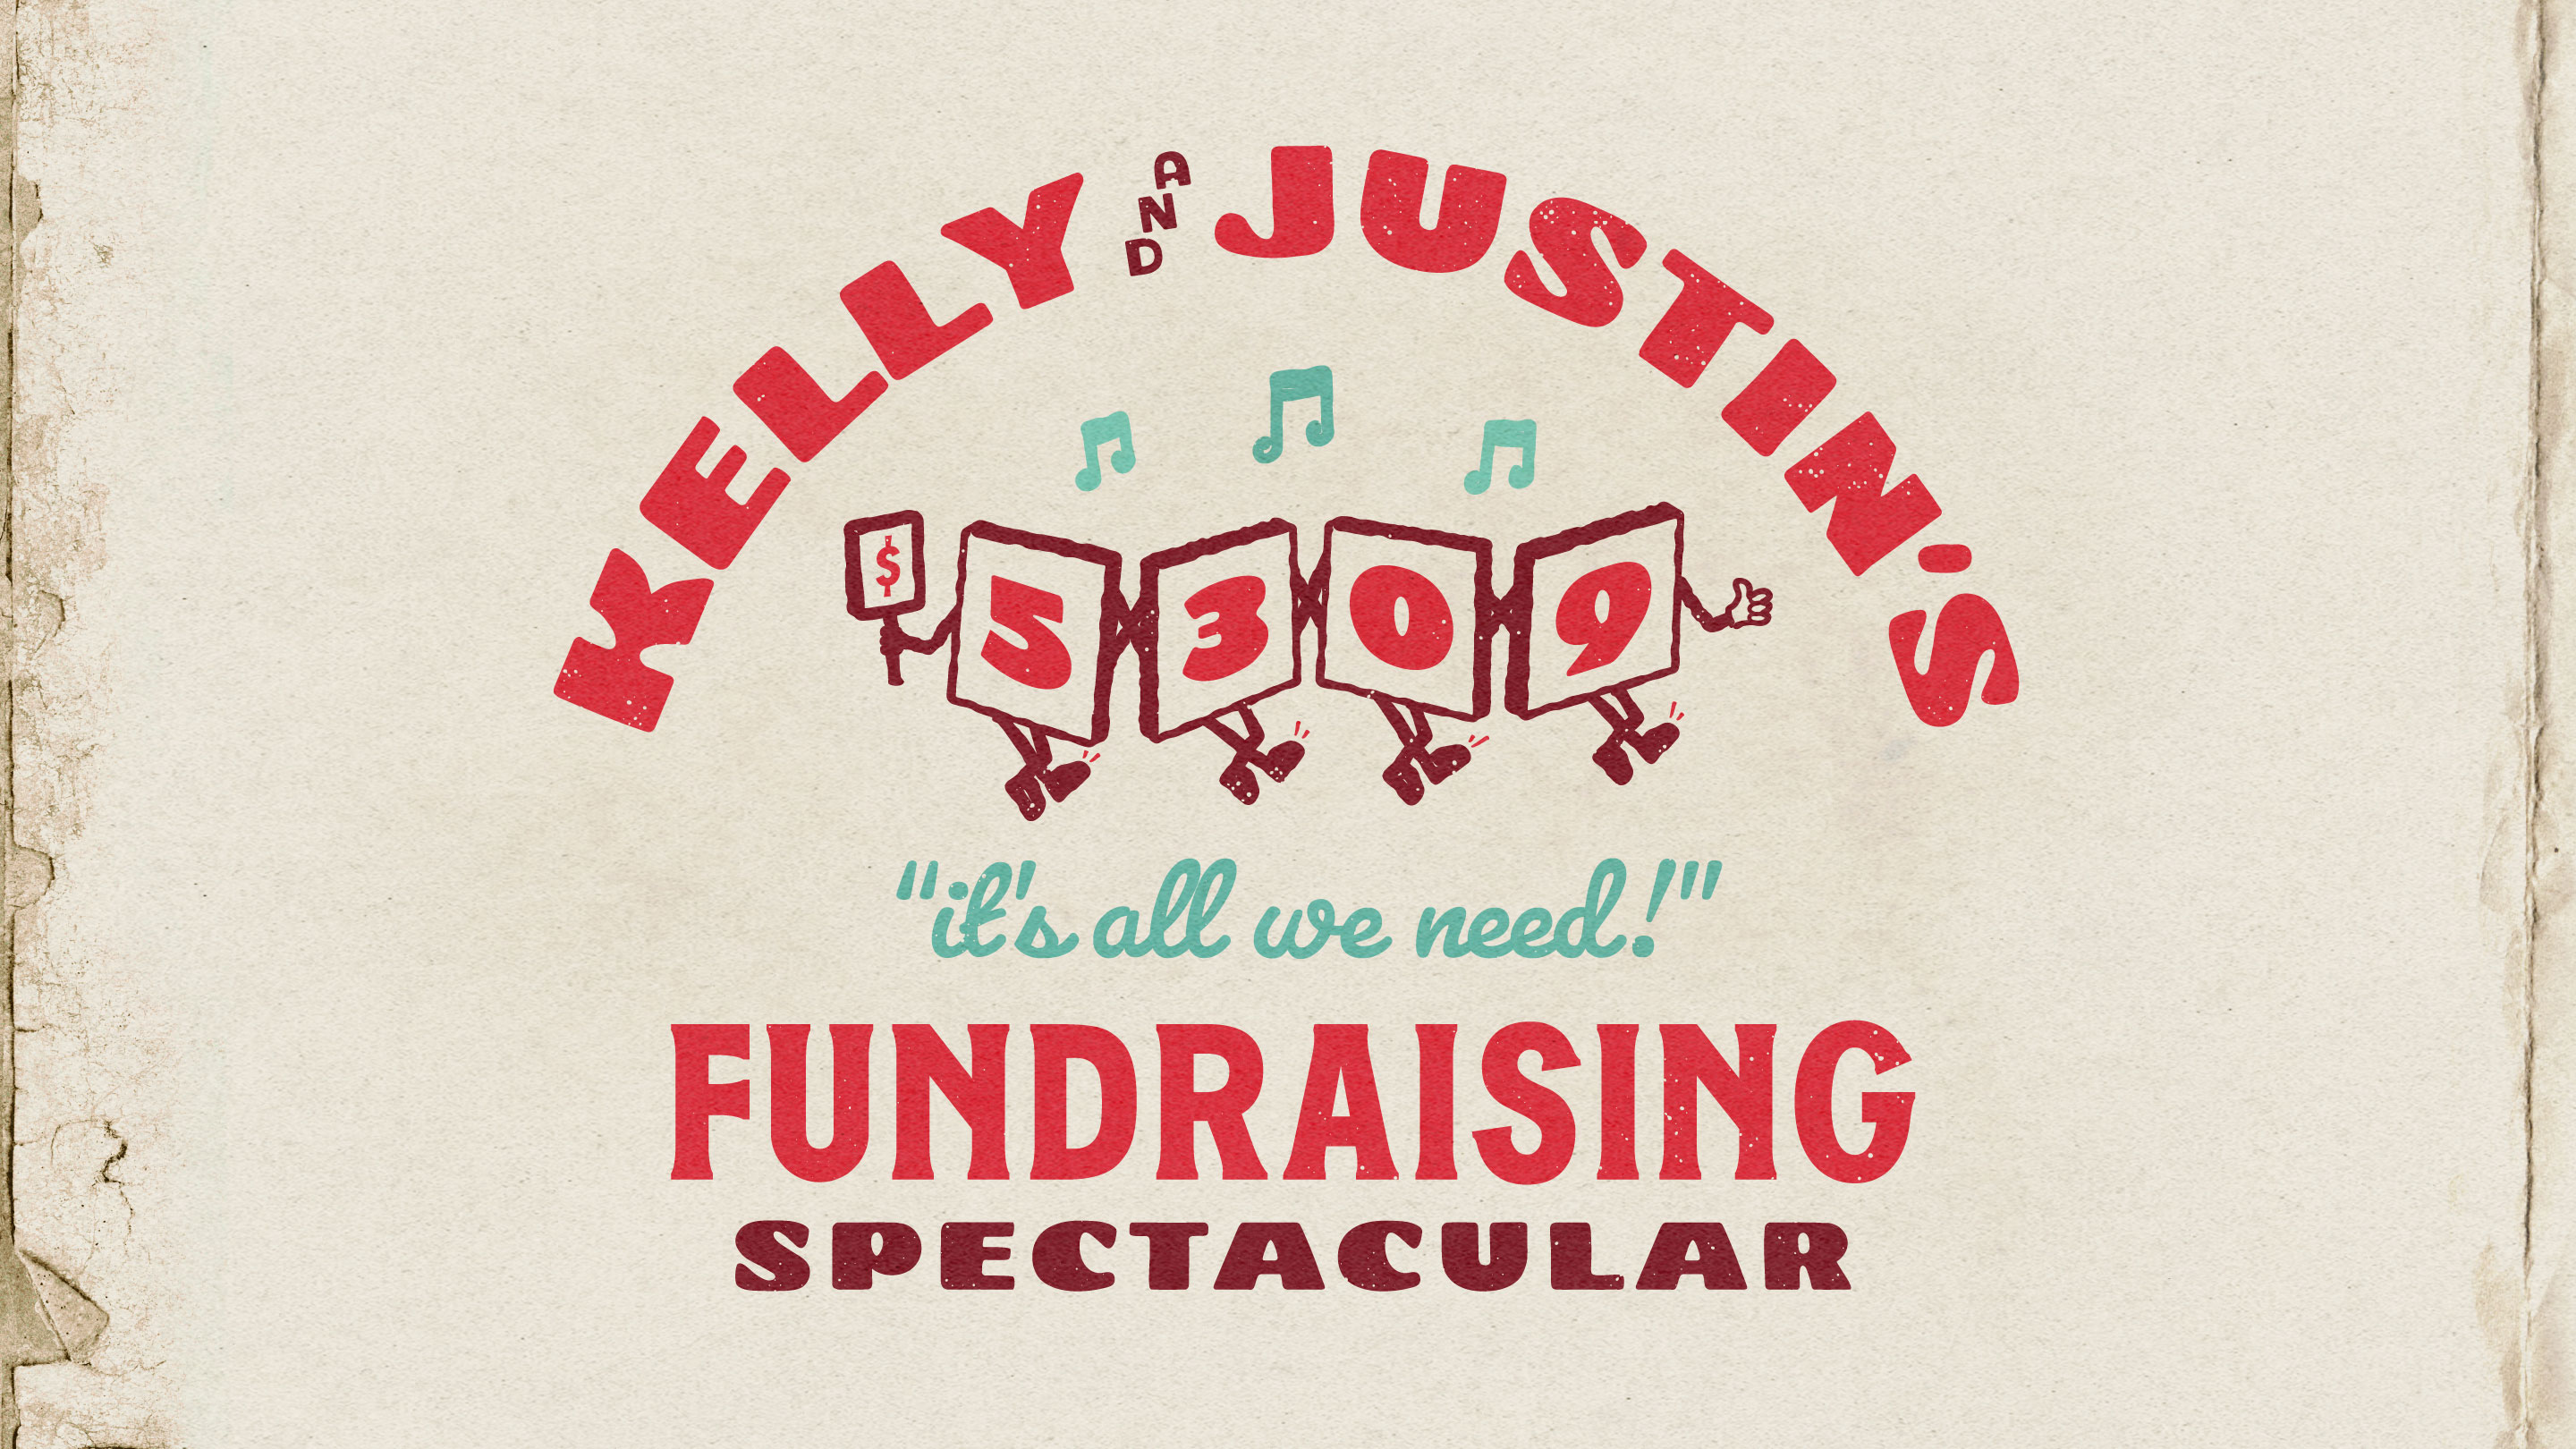 Kelly and Justin's Fundraising Spectacular